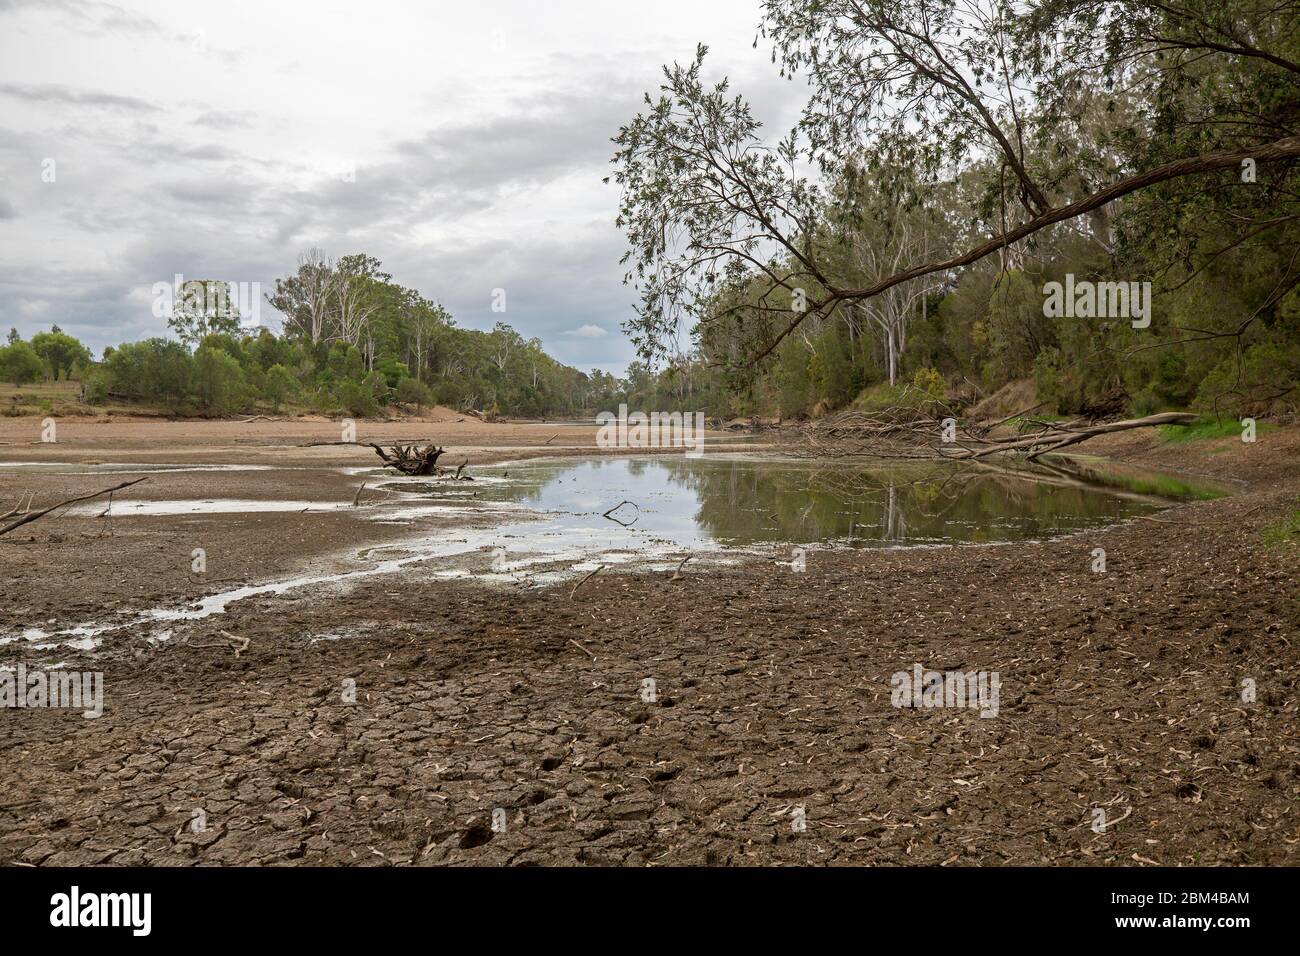 Landscape dominated by Mary River, in south-eastern Queensland Australia, that has been reduced to a muddy stream during severe drought Stock Photo